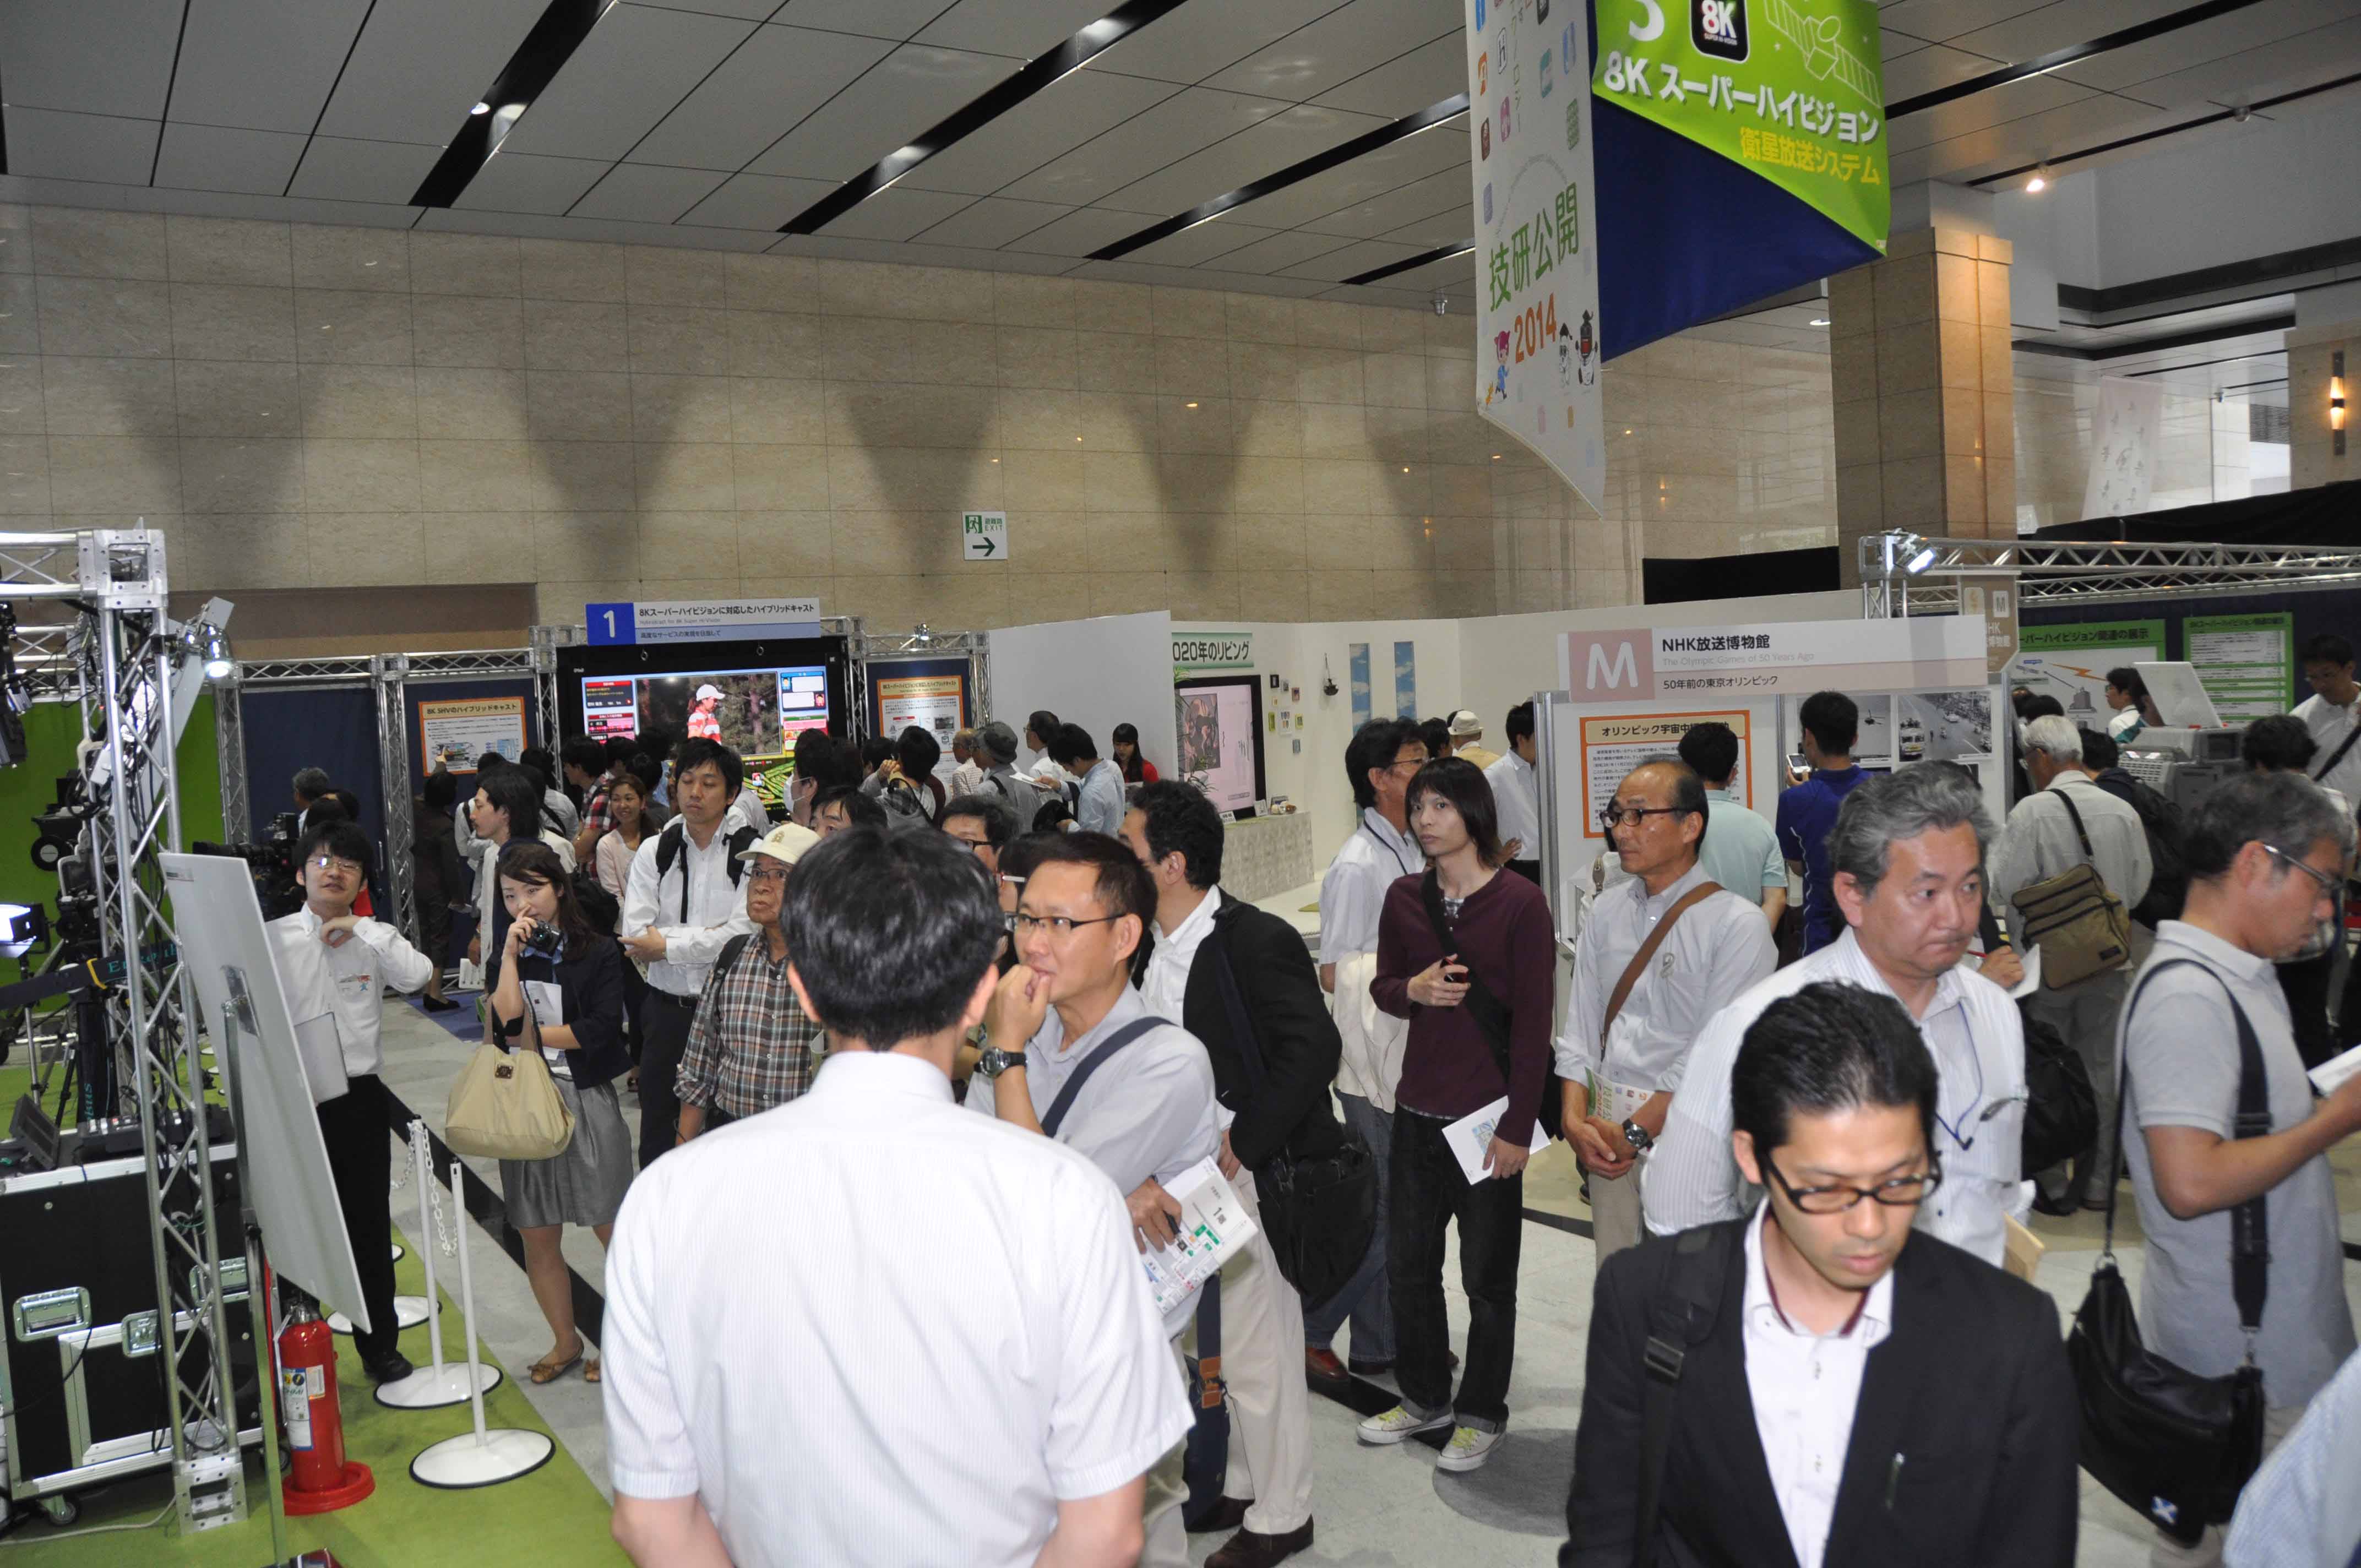 The Giken public exhibition took great care to make exhibits understandable to the general public. Each of the wide-rang